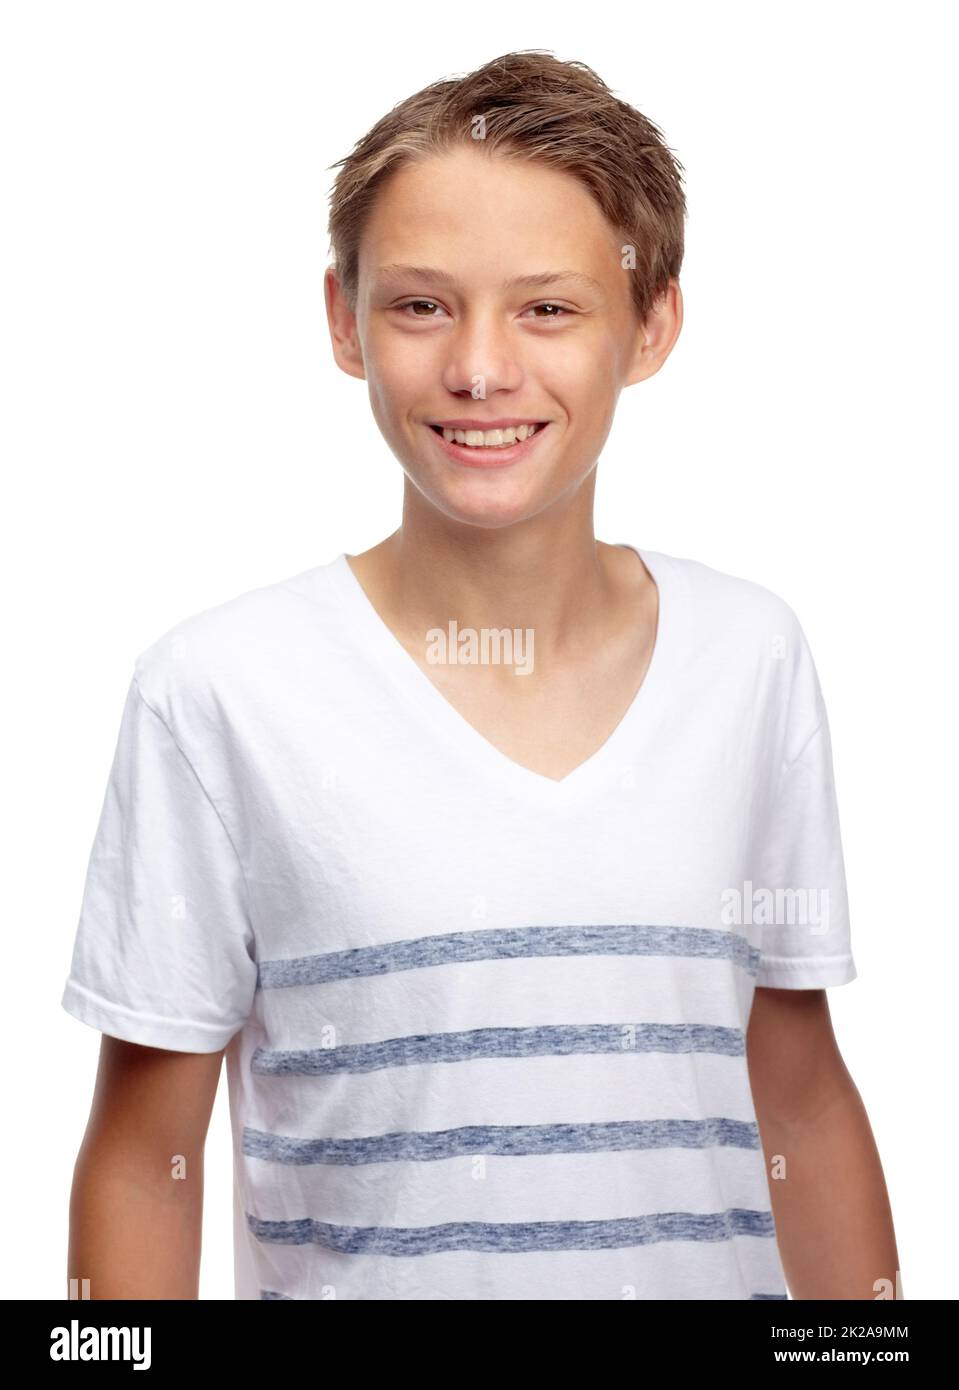 Hes a cool and casual kid. Portrait of a young boy. Stock Photo